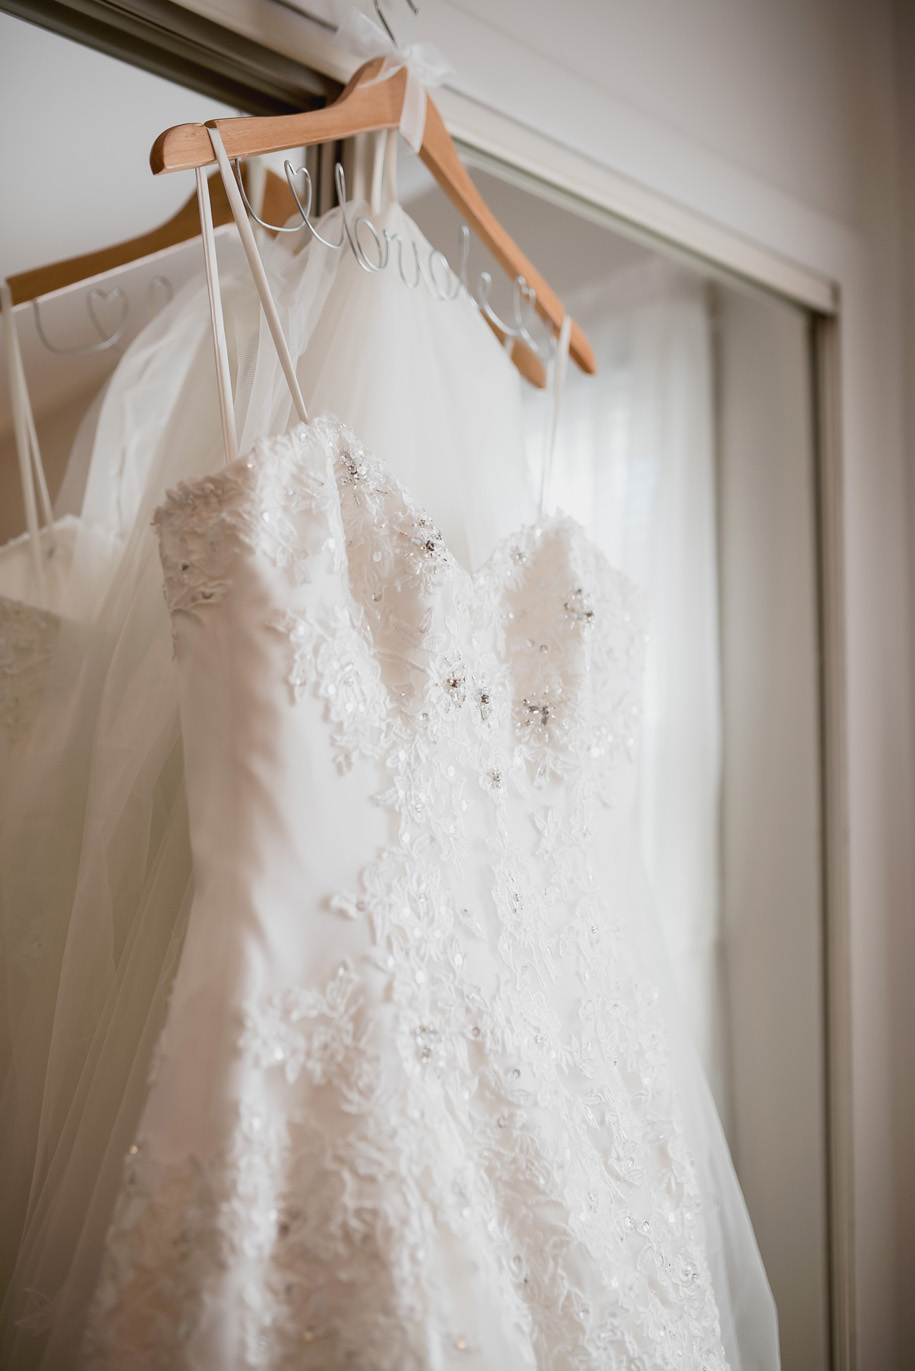 Sweetheart neckline, lace wedding gown with a bodice that ties. Perfect silhouette for any bride. A fall wedding in Michigan by Kari Dawson